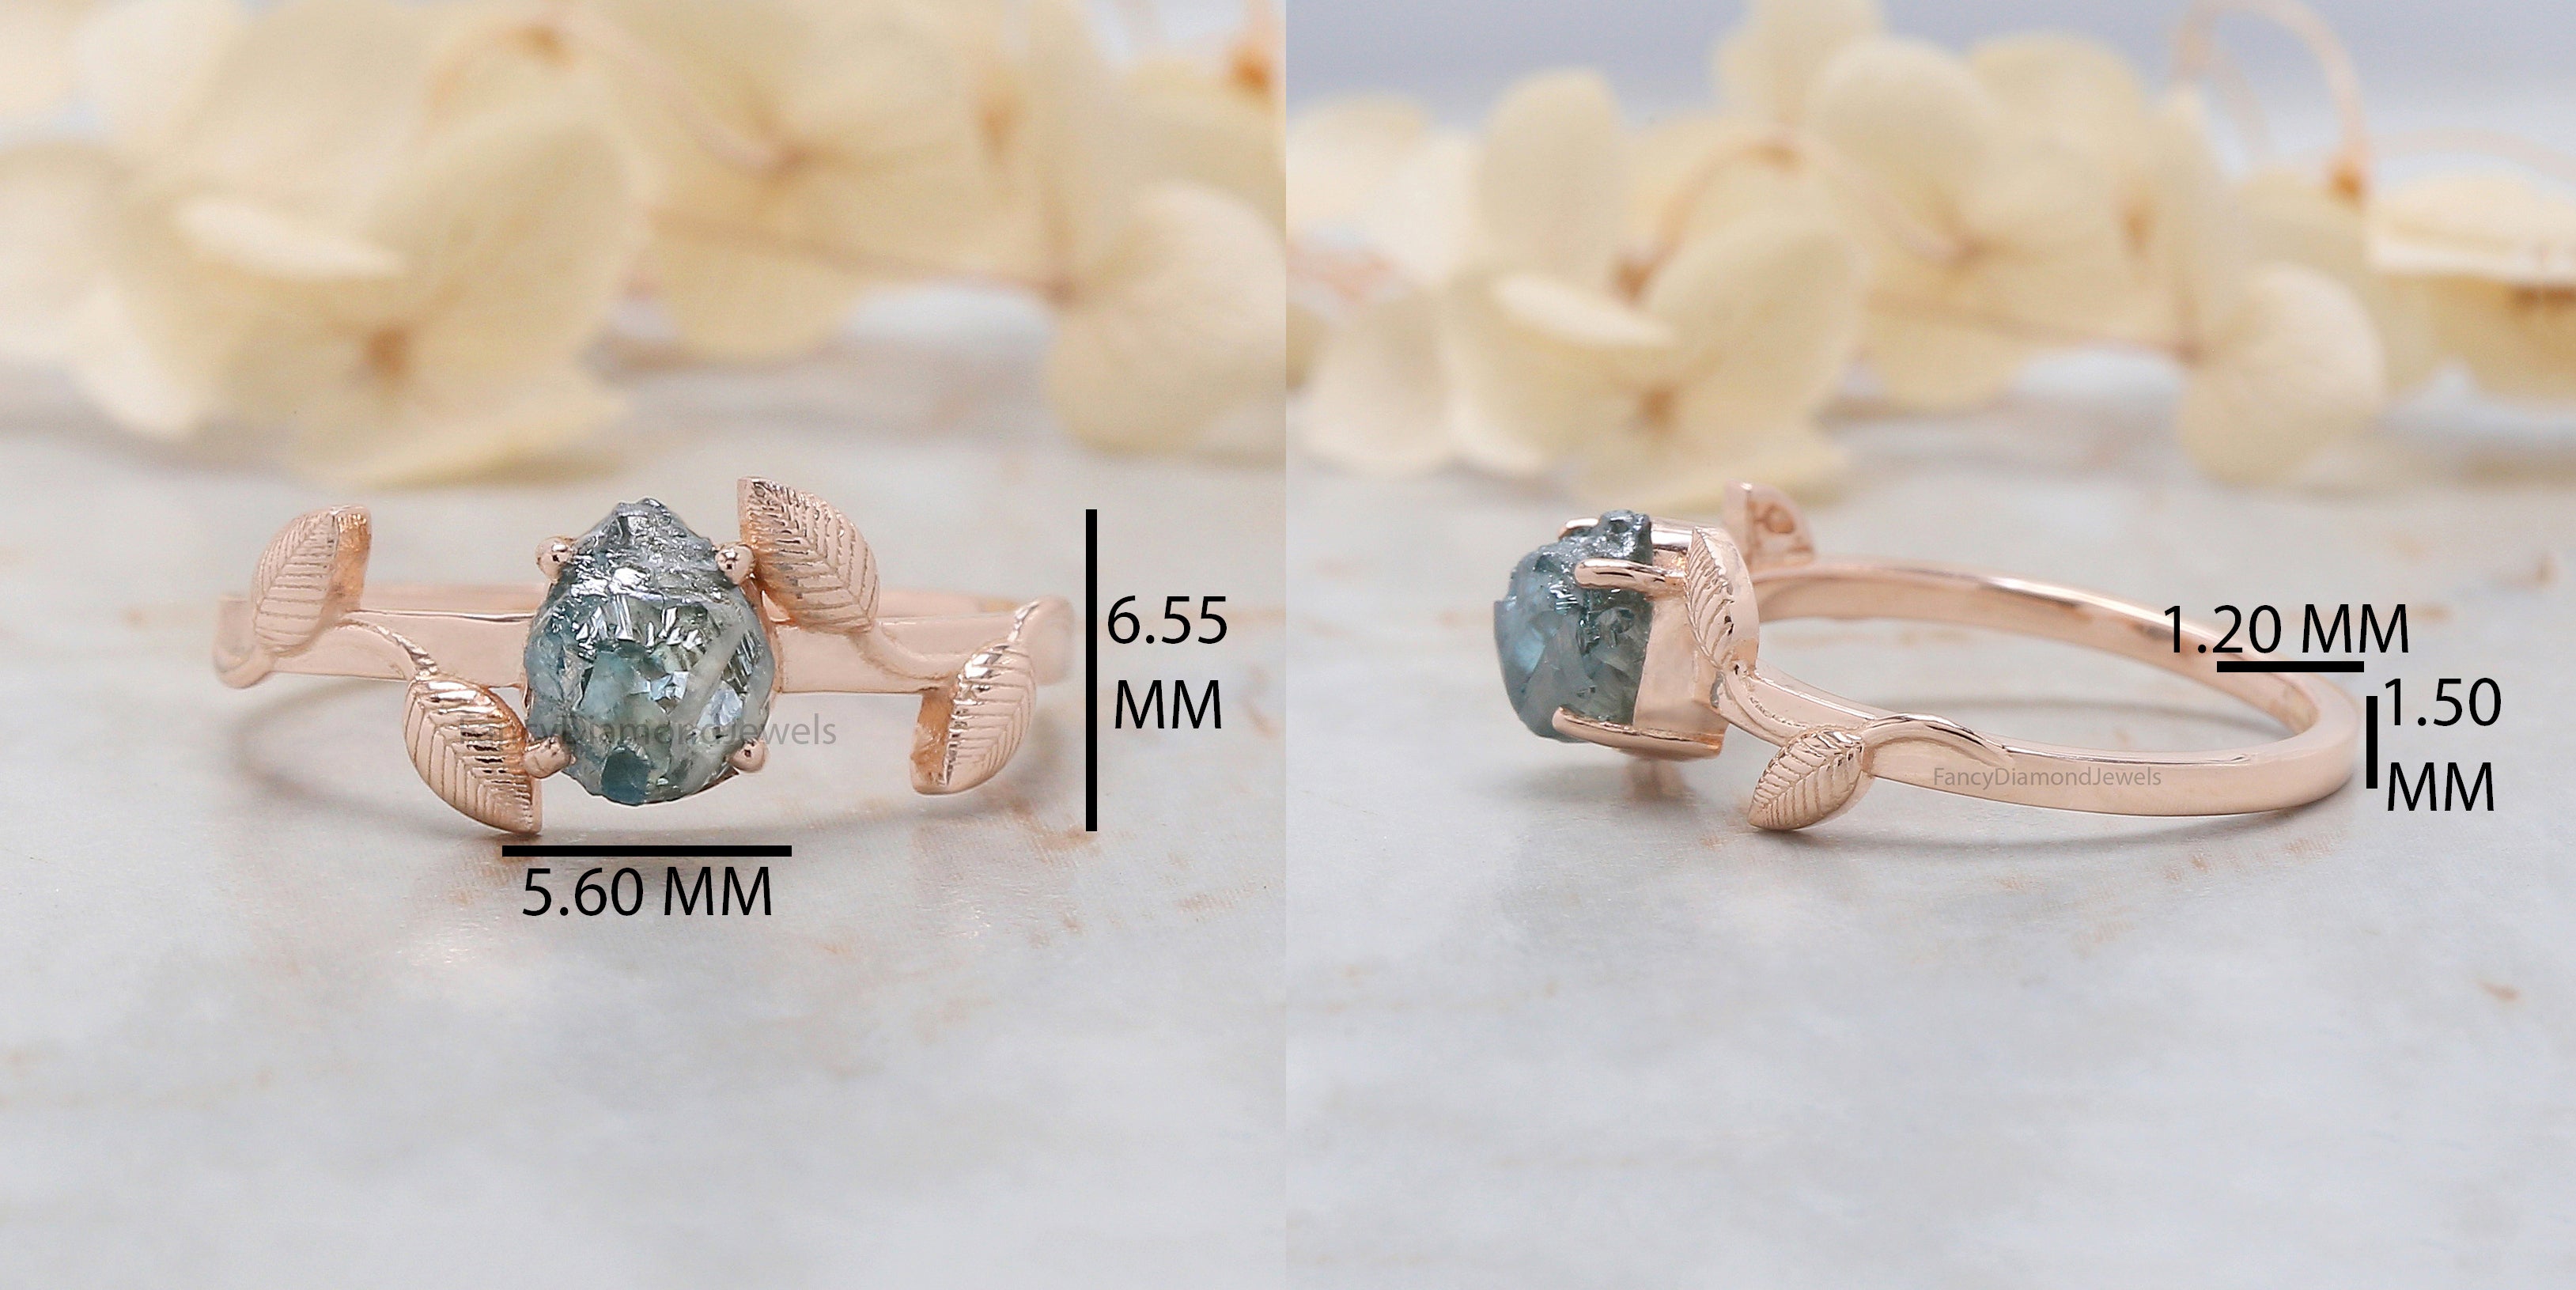 Rough Blue Color Diamond Ring 1.25 Ct 6.34 MM Crystal Rough Diamond Ring 14K Solid Rose Gold Silver Engagement Ring Gift For Her QL2270